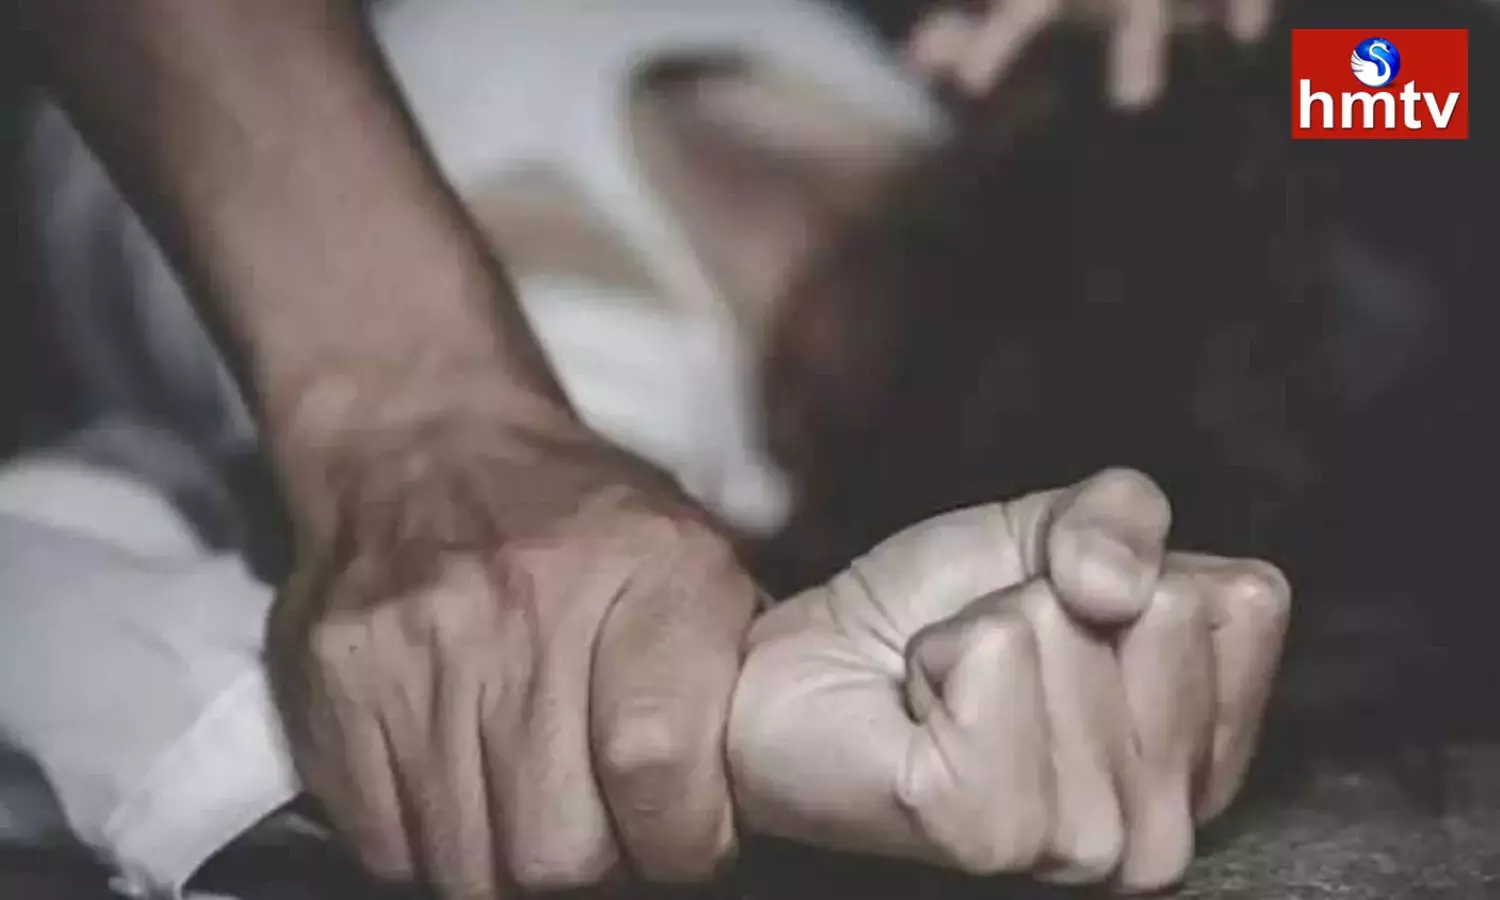 A Girl Was Raped By Five People in Hyderabad